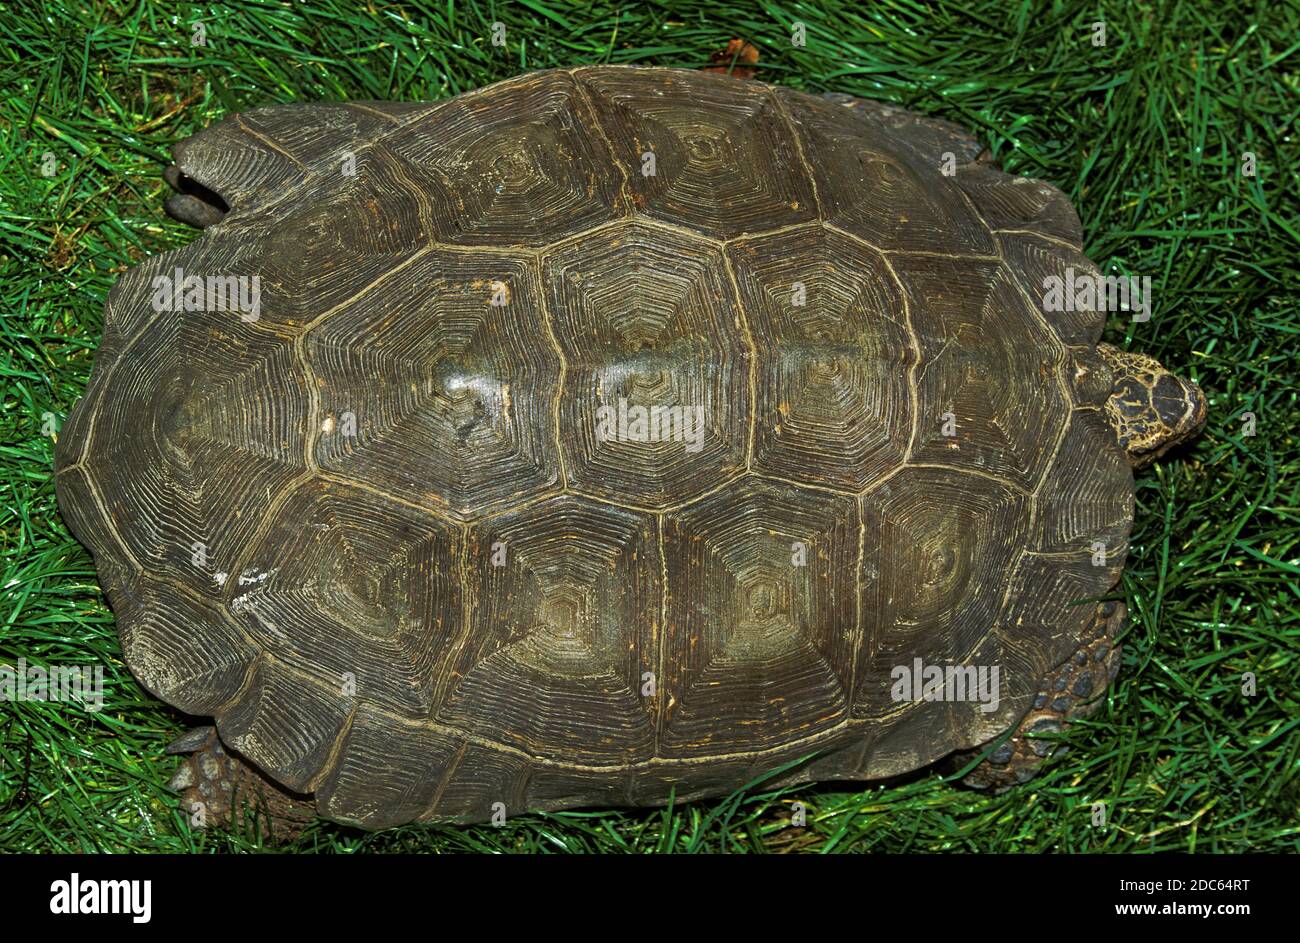 TORTOISE, TO VIEW OF CARAPACE Stock Photo